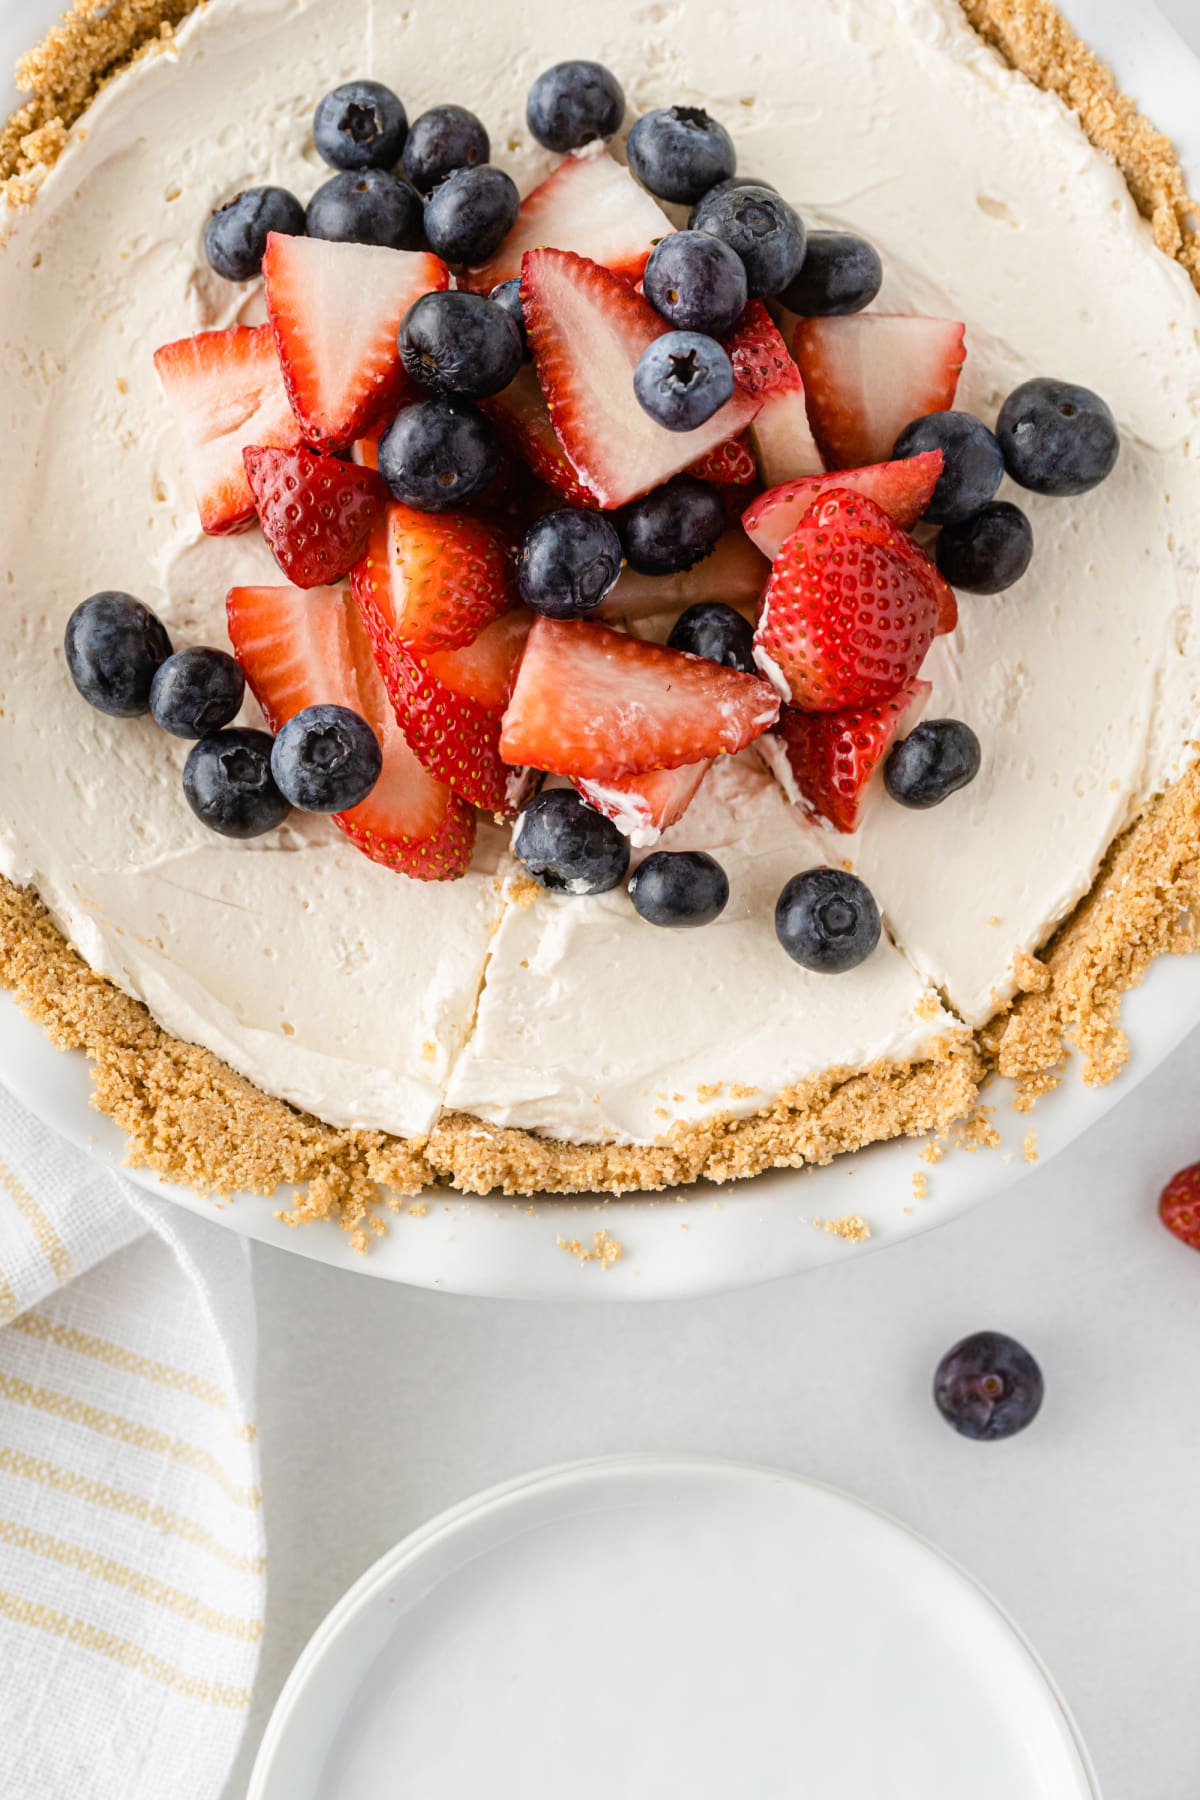 No bake cool whip cheesecake with strawberries and blueberries